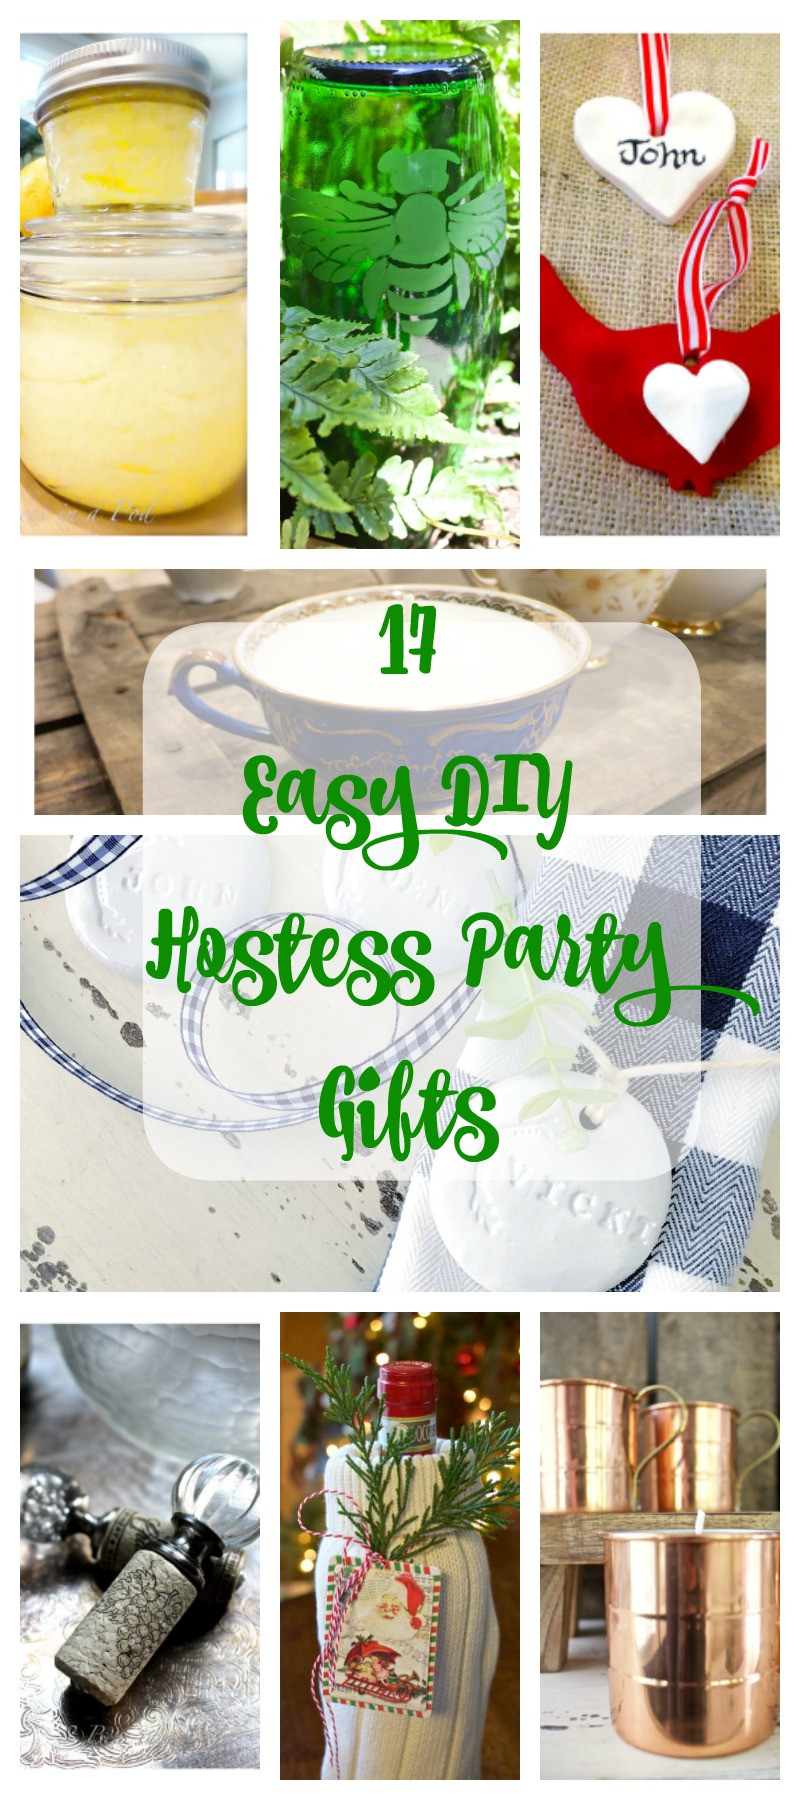 Christmas Gift Ideas On Pinterest
 17 Ideas for Easy DIY Holiday Hostess Gifts 2 Bees in a Pod